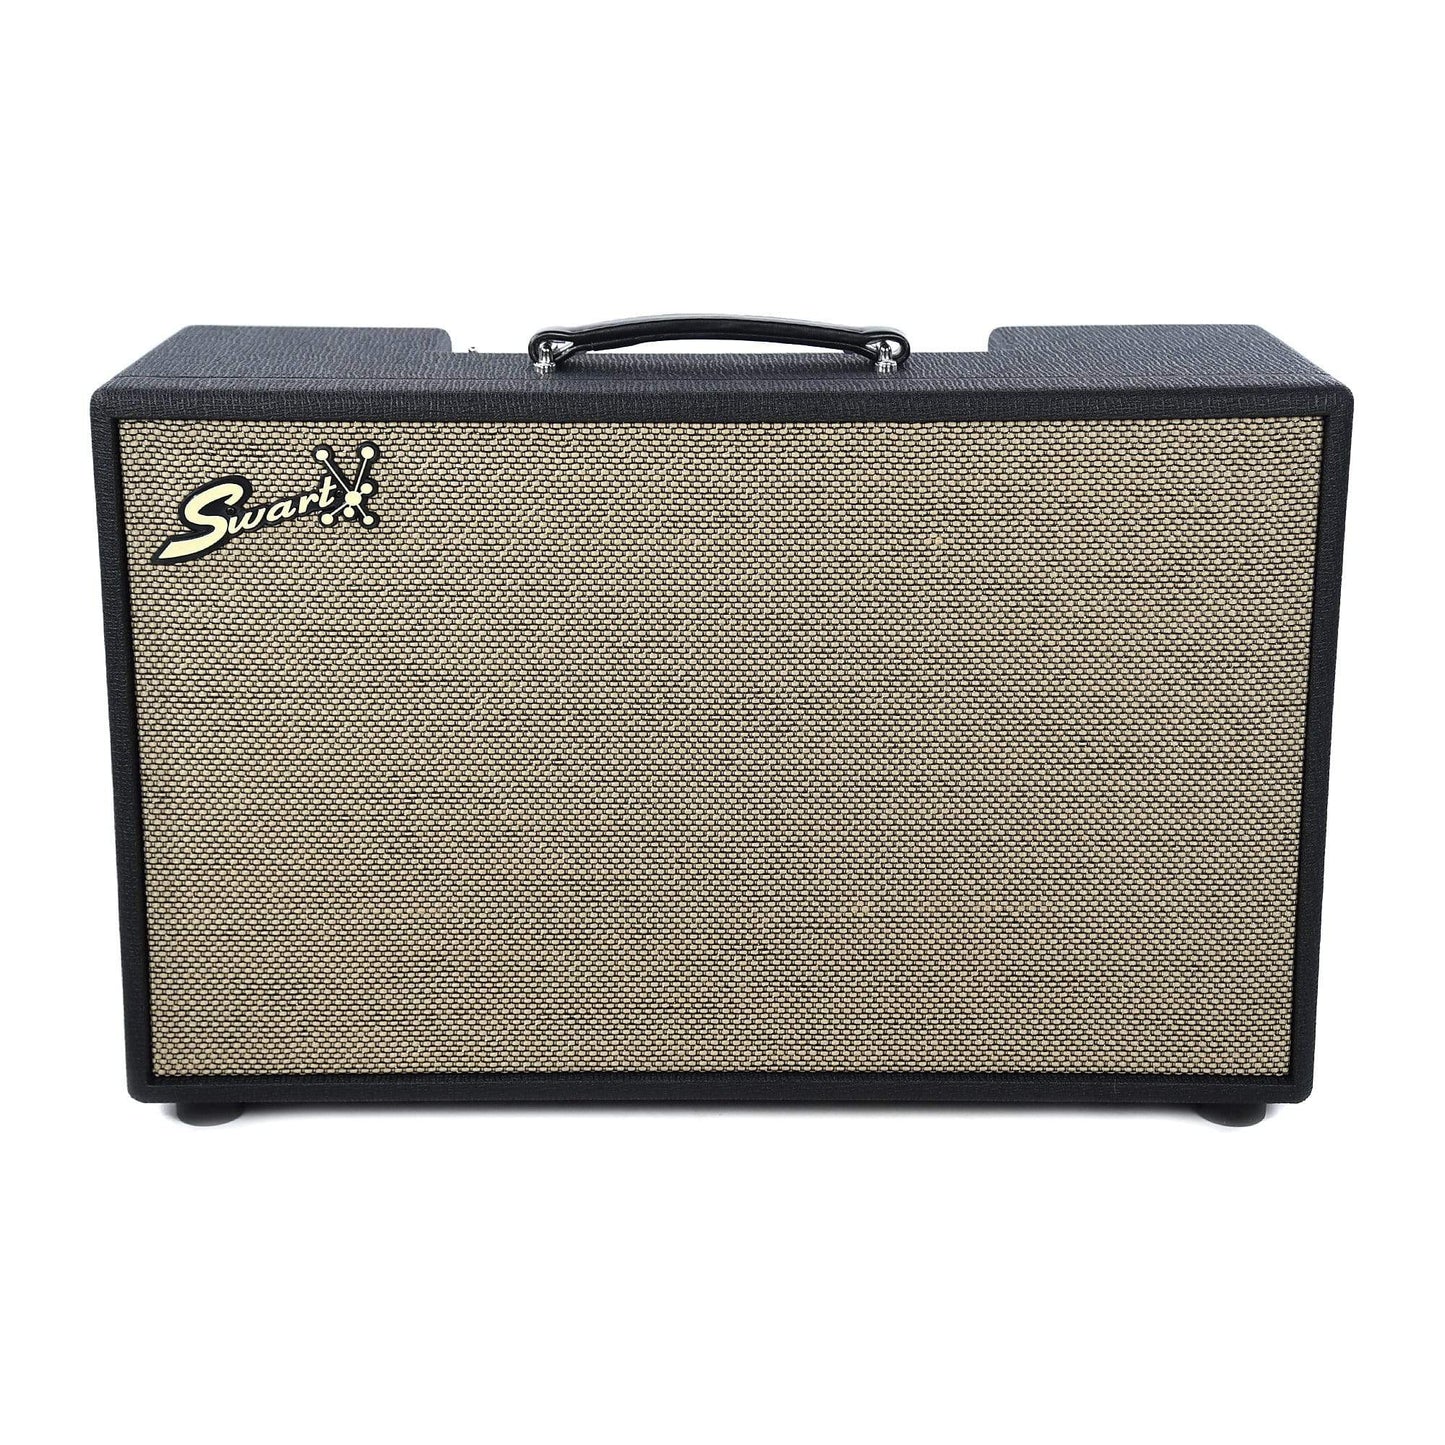 Swart Antares w/ Celestion Creamback Speaker & Old School Gold Piping Amps / Guitar Combos